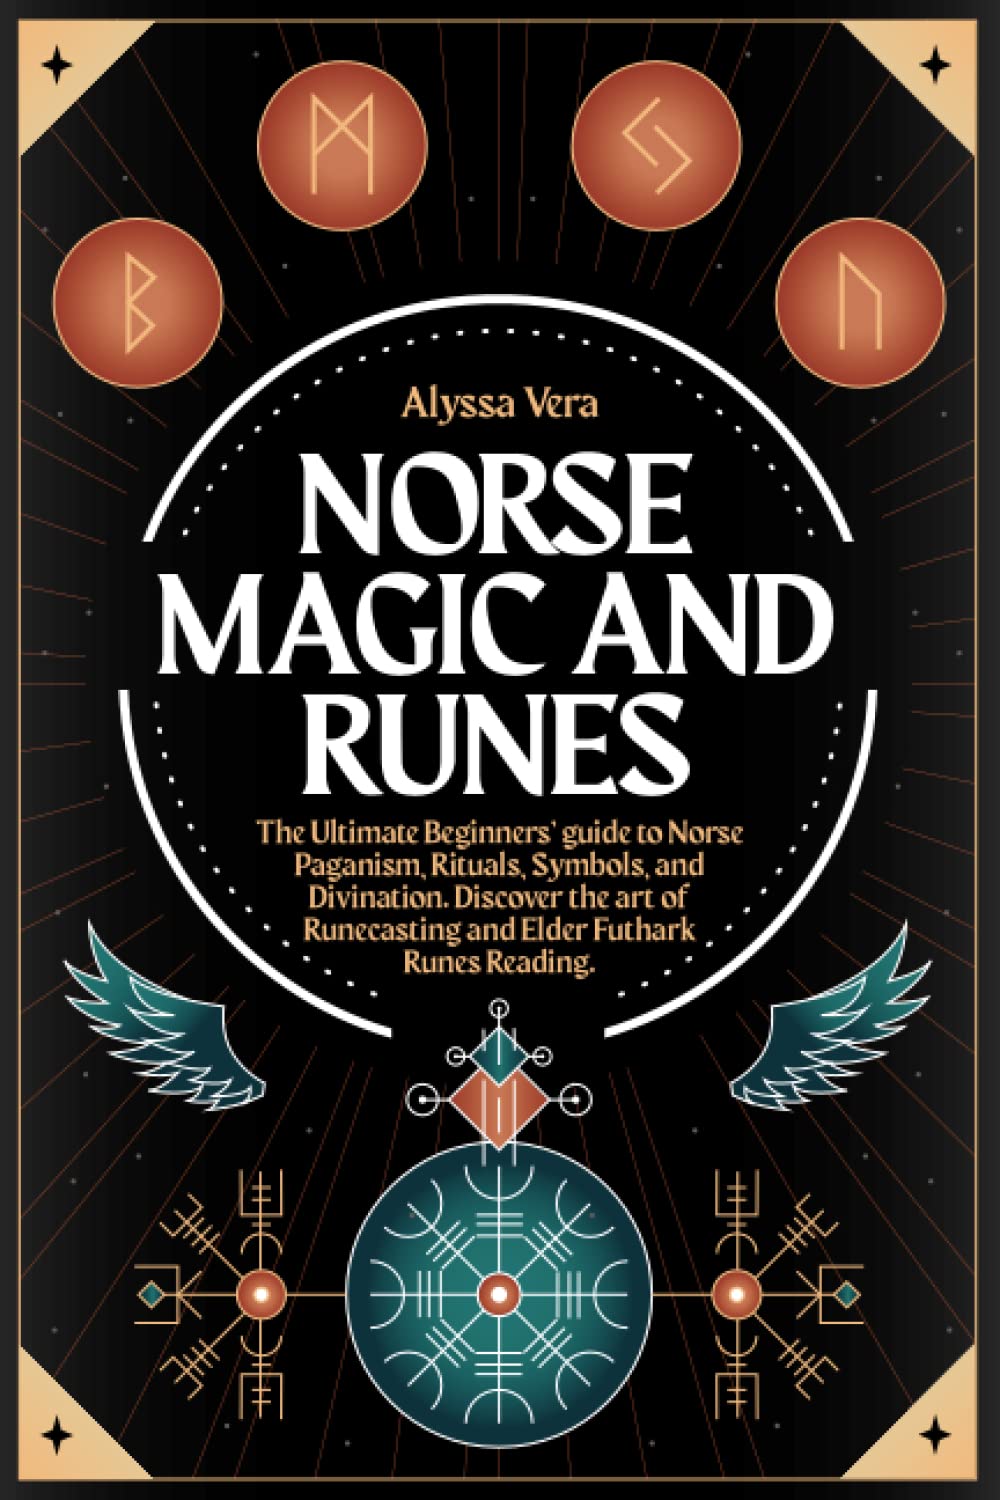 Norse Magic and Runes: The Ultimate Beginners’ guide to Norse Paganism, Rituals, Symbols, and Divination. Discover the art of Runecasting and Elder Futhark Runes Reading